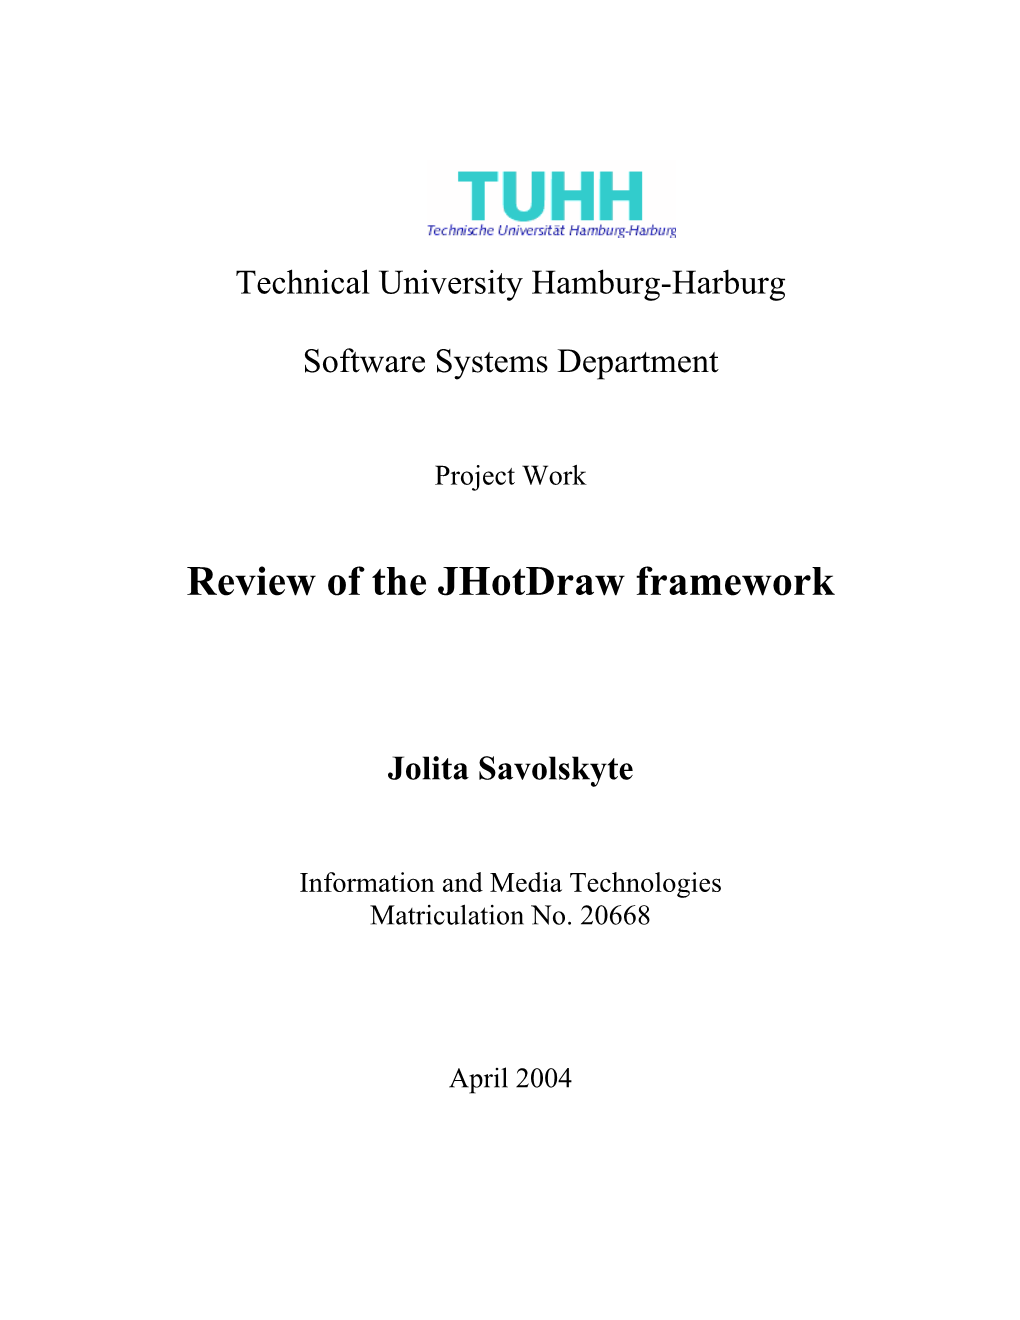 Review of the Jhotdraw Framework